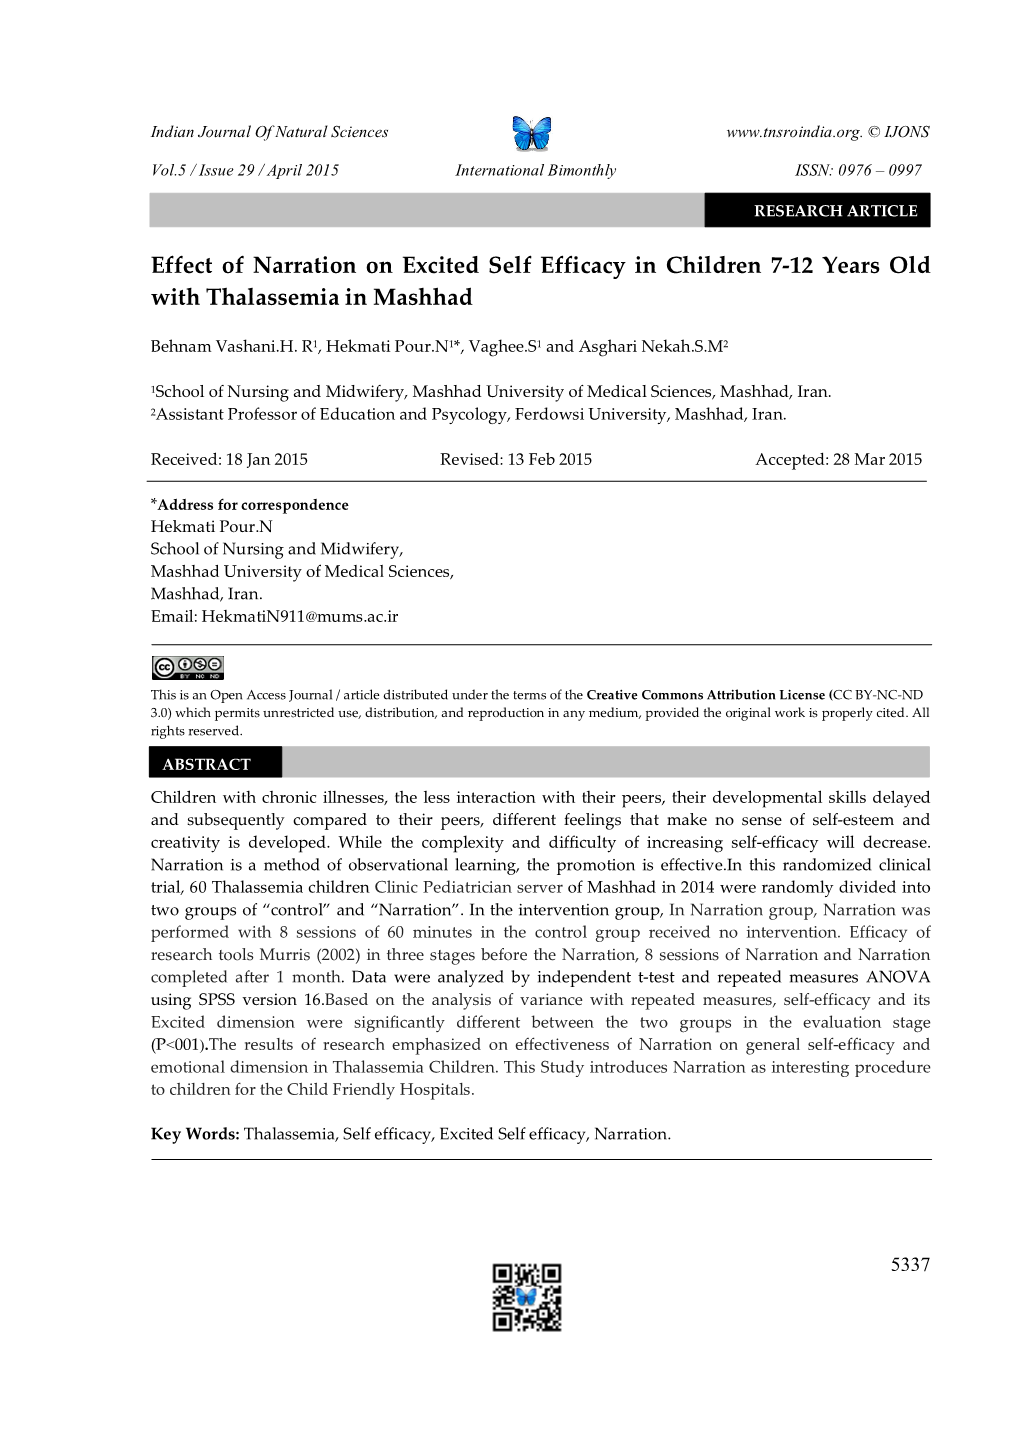 Effect of Narration on Excited Self Efficacy in Children 7-12 Years Old with Thalassemia in Mashhad